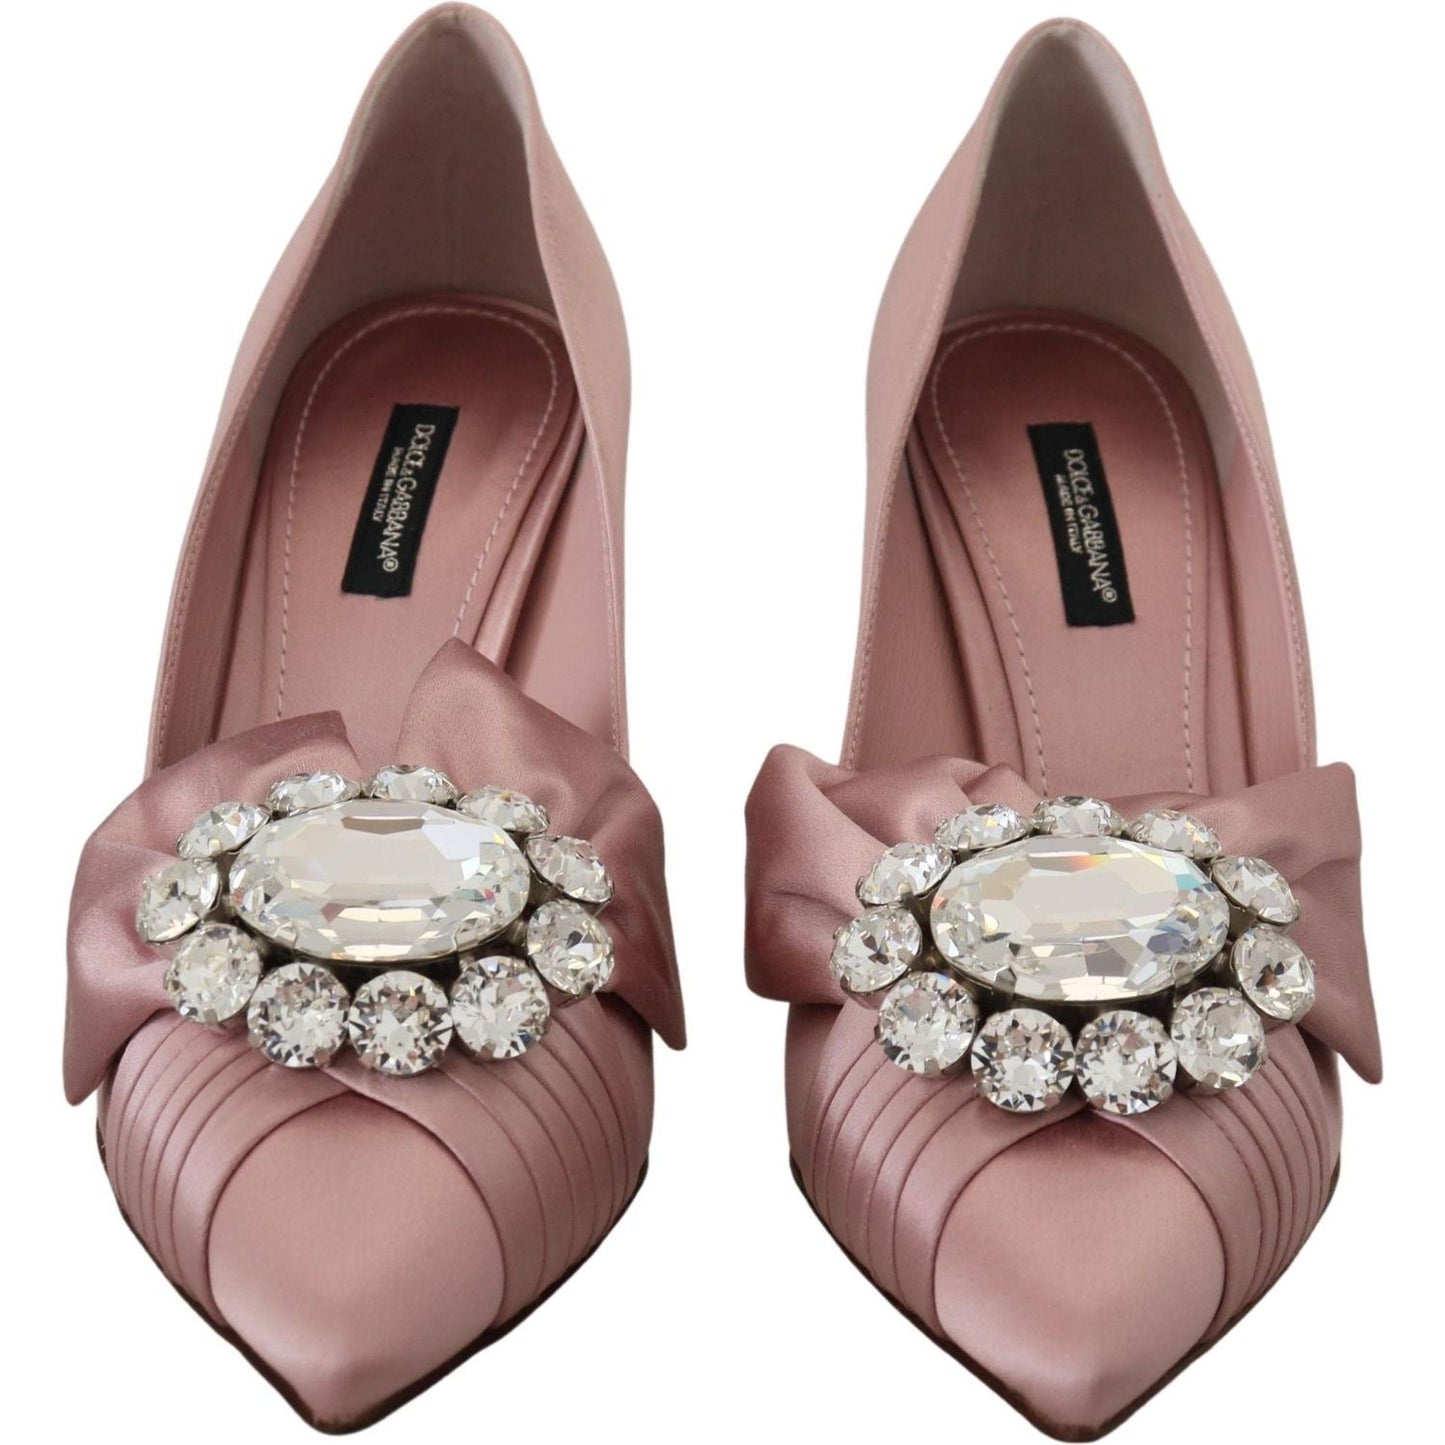 Dolce & Gabbana Crystal-Embellished Silk Bow Pumps pink-silk-clear-crystal-pumps-classic-shoes